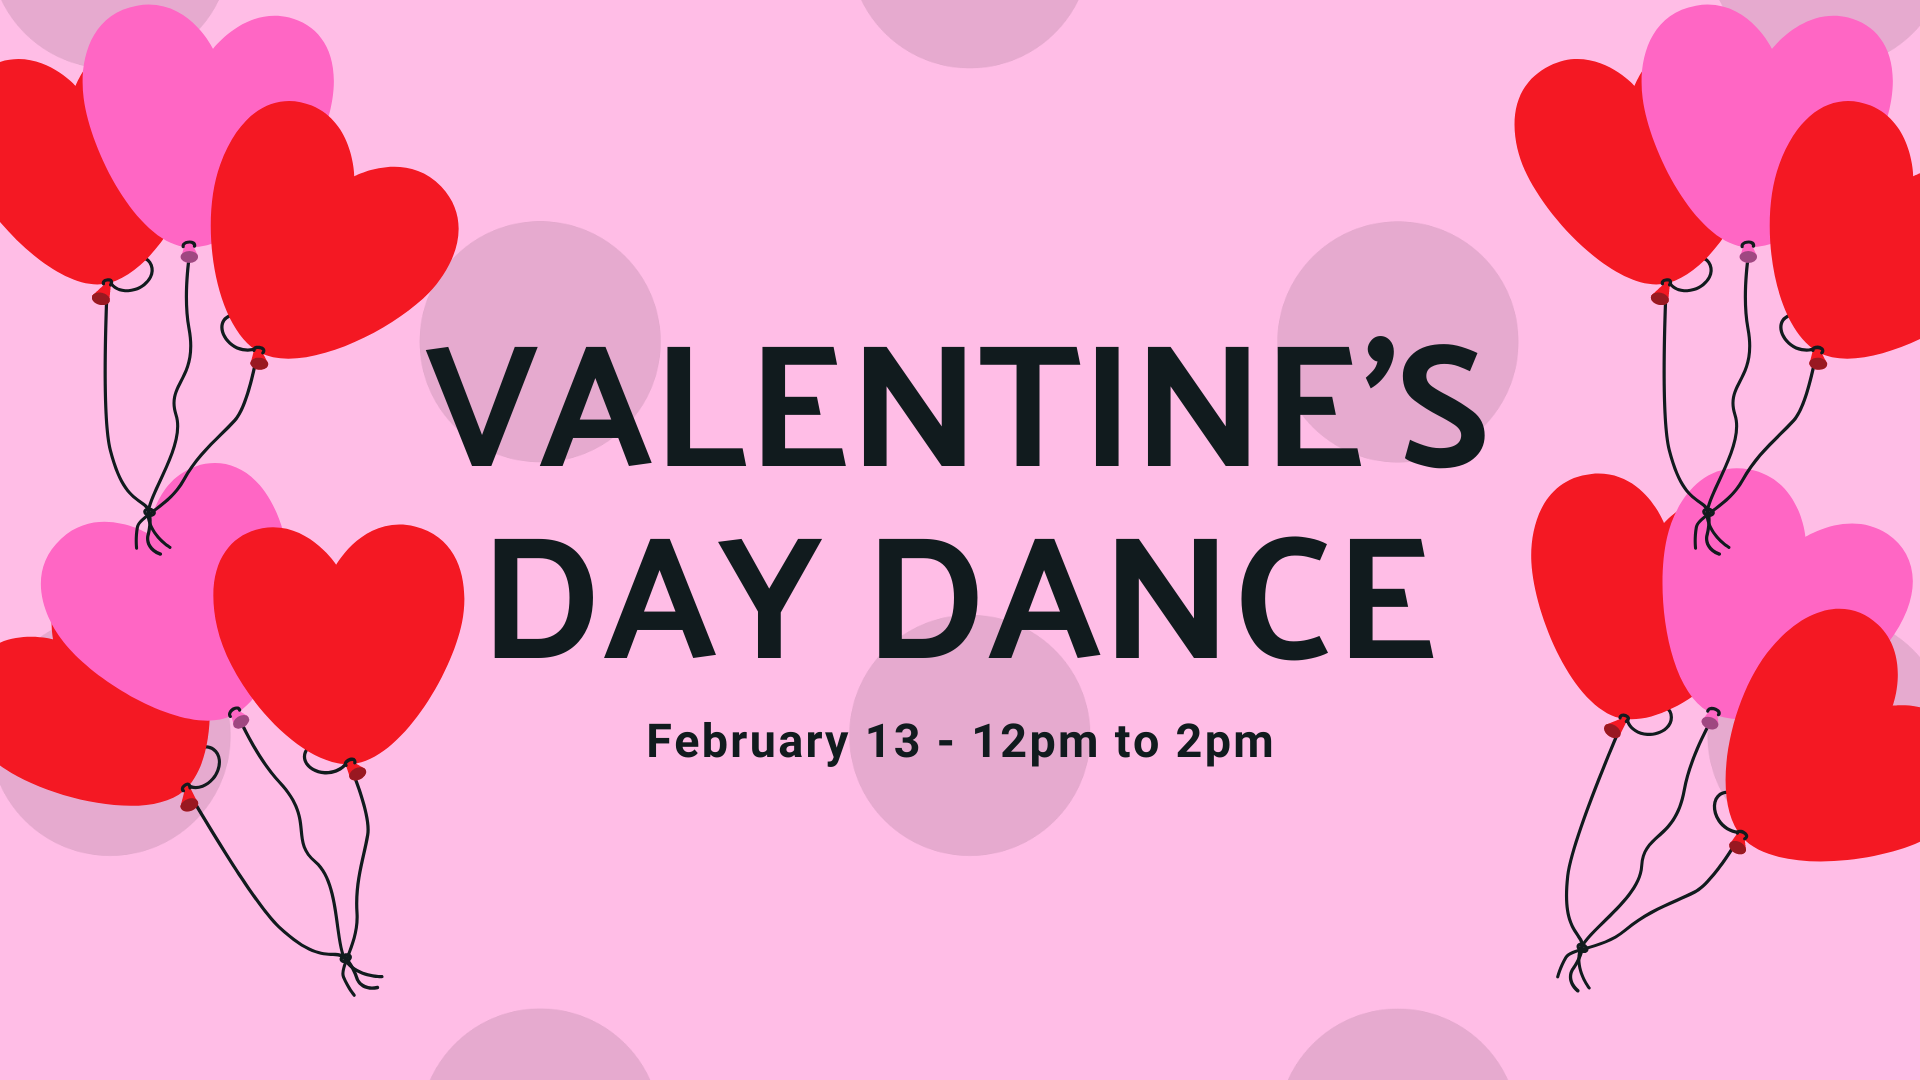 Pink background, red and pink heart balloons. Text reads: Valentine's Day Dance February 11 12pm to 2pm